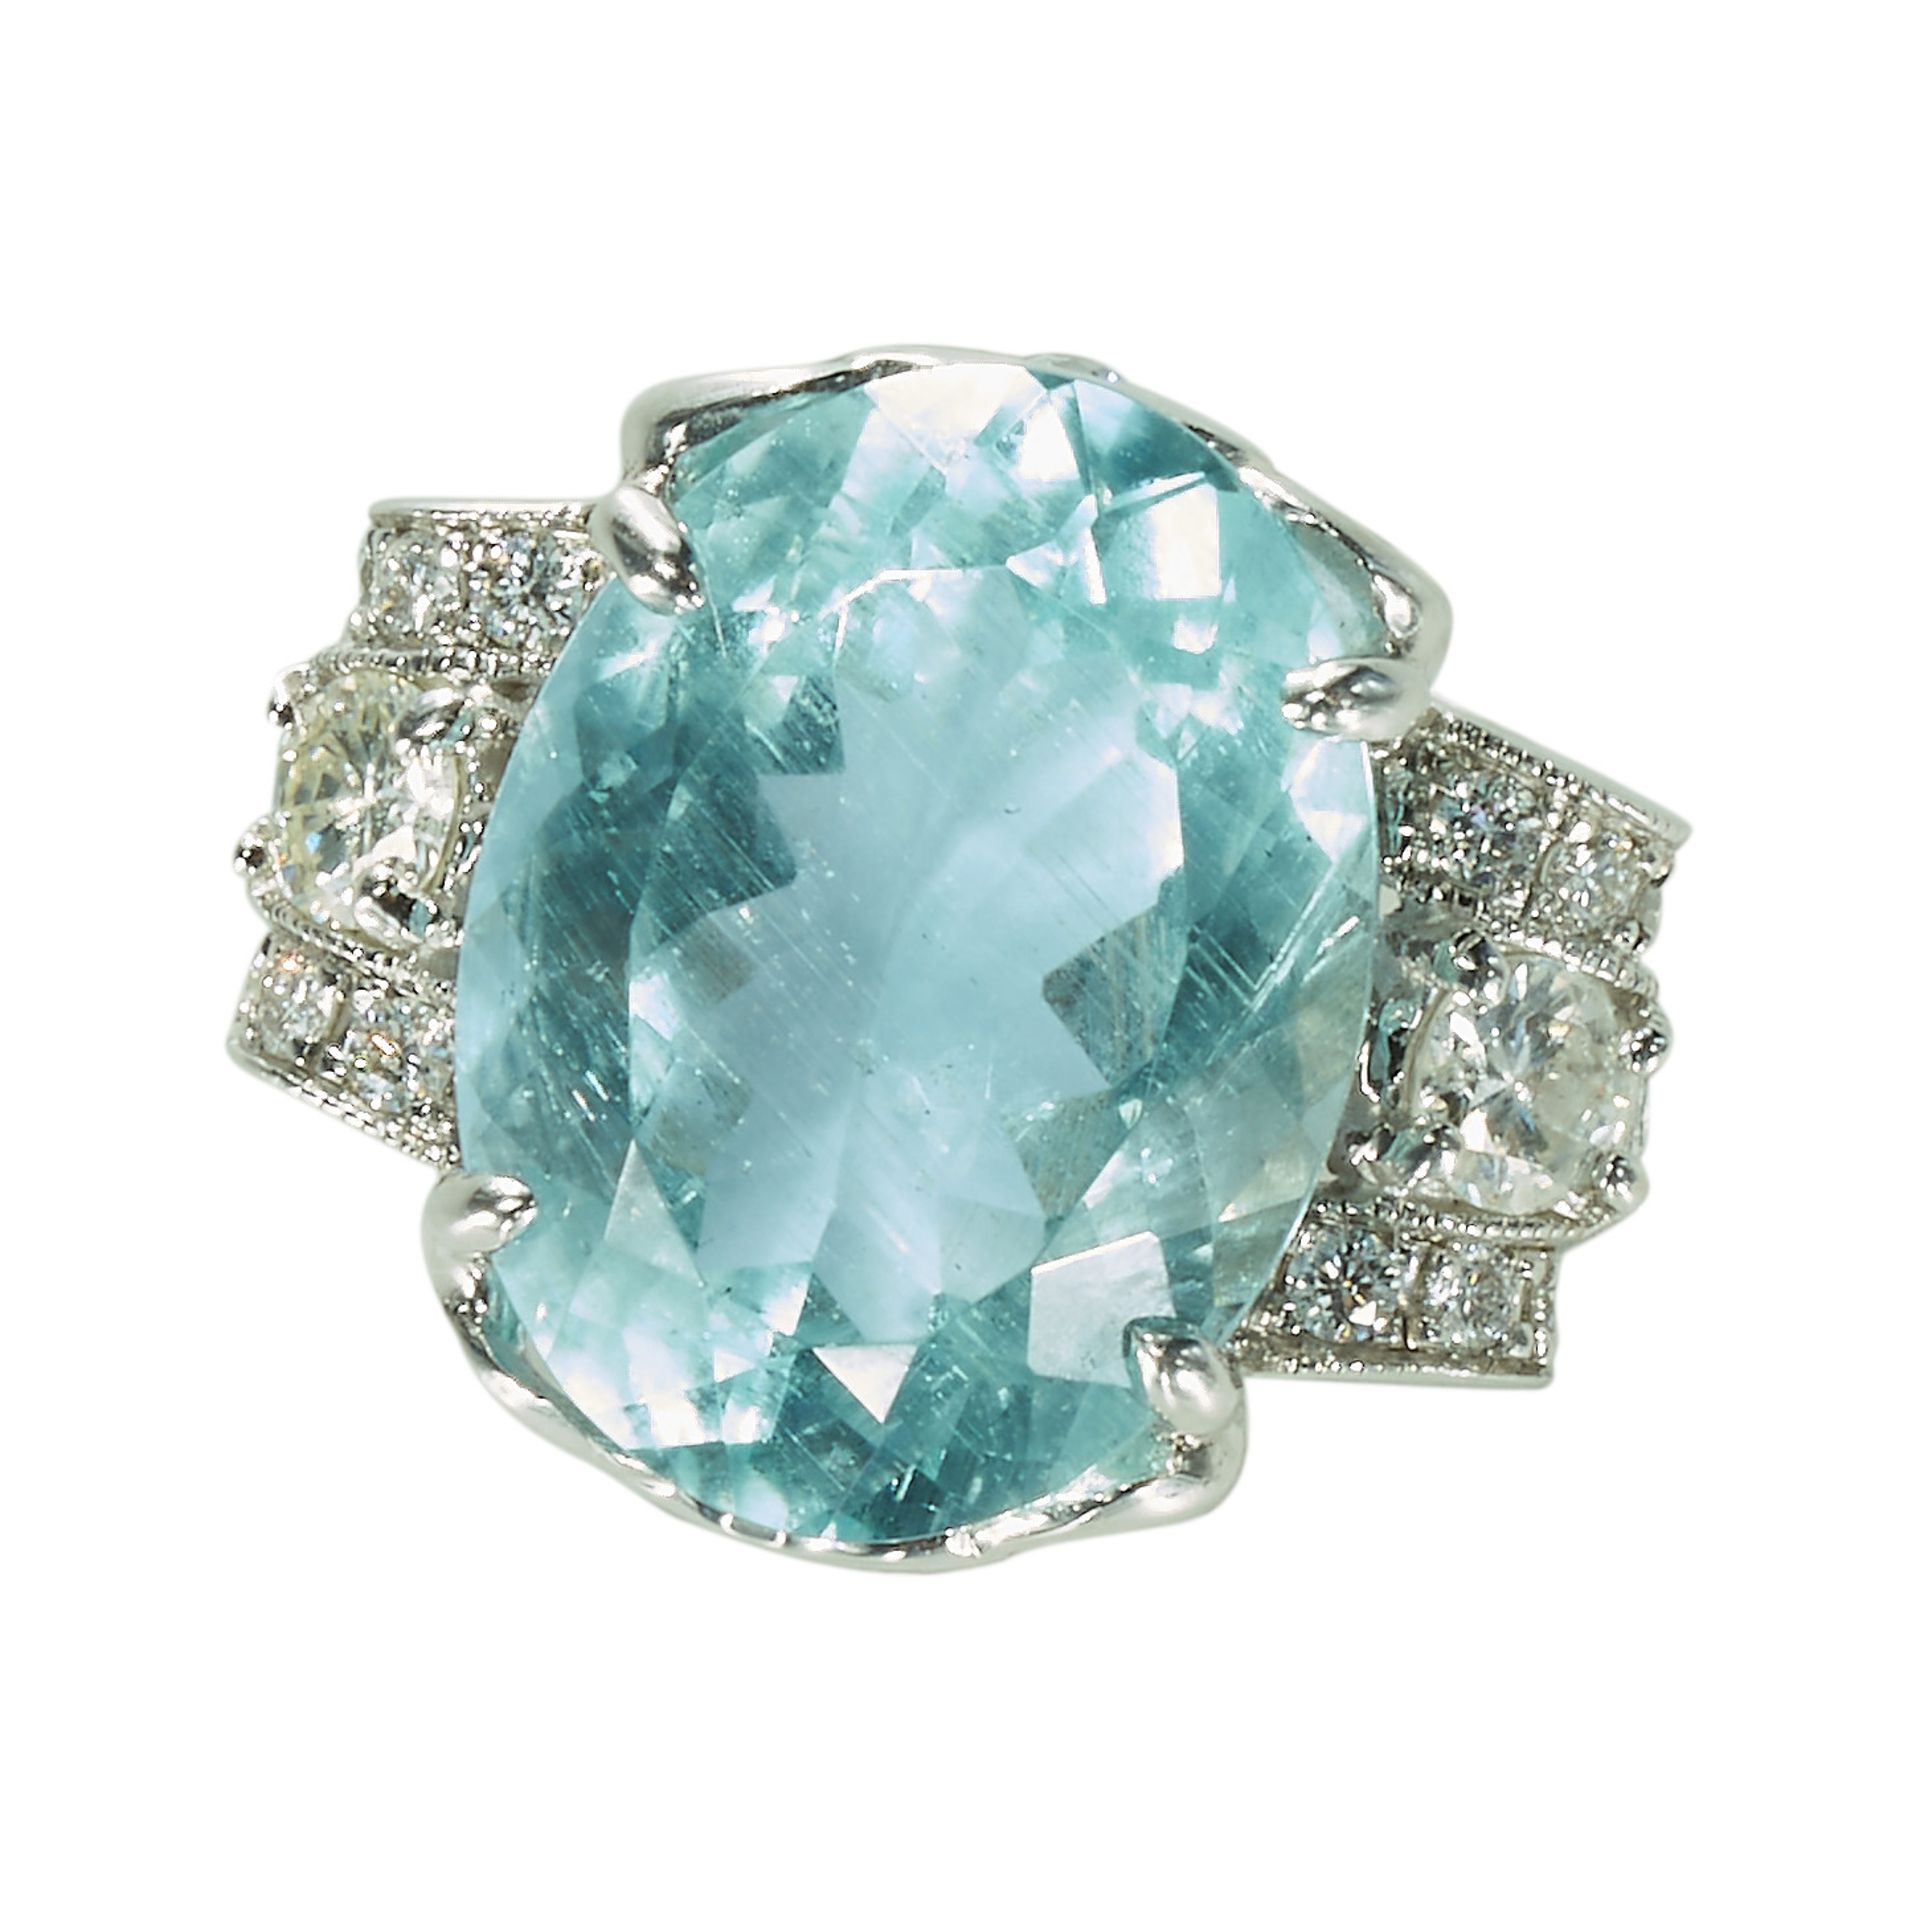 AN AQUAMARINE AND DIAMOND RING, IN 18CT WHITE GOLD.